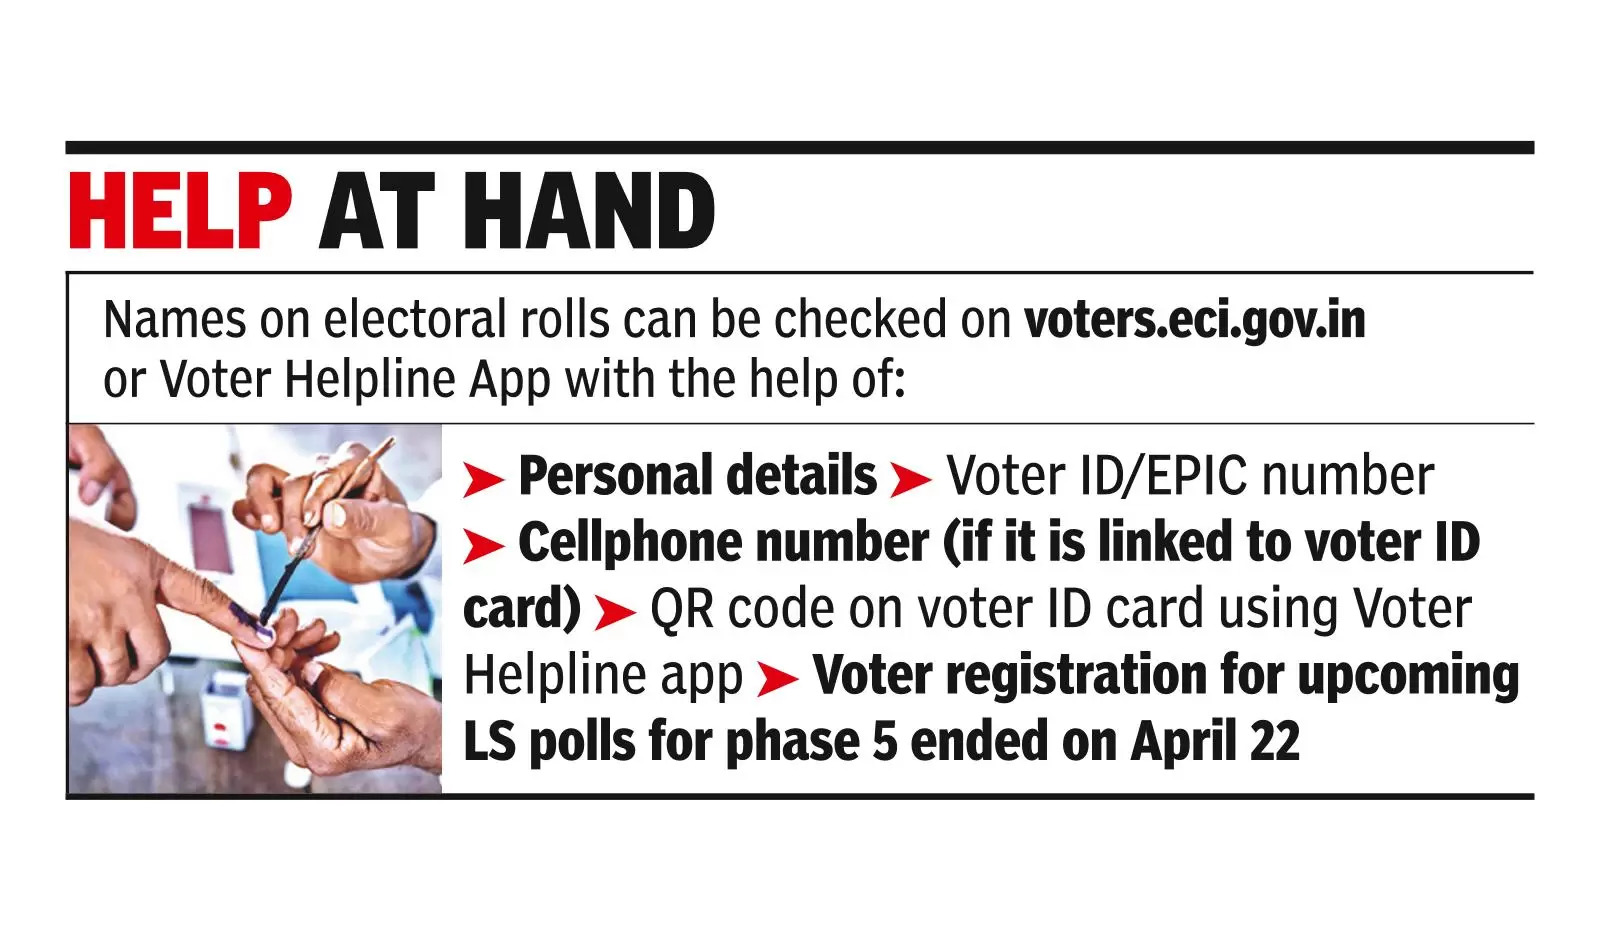 4 lakh voter names deleted before March 16: Officials